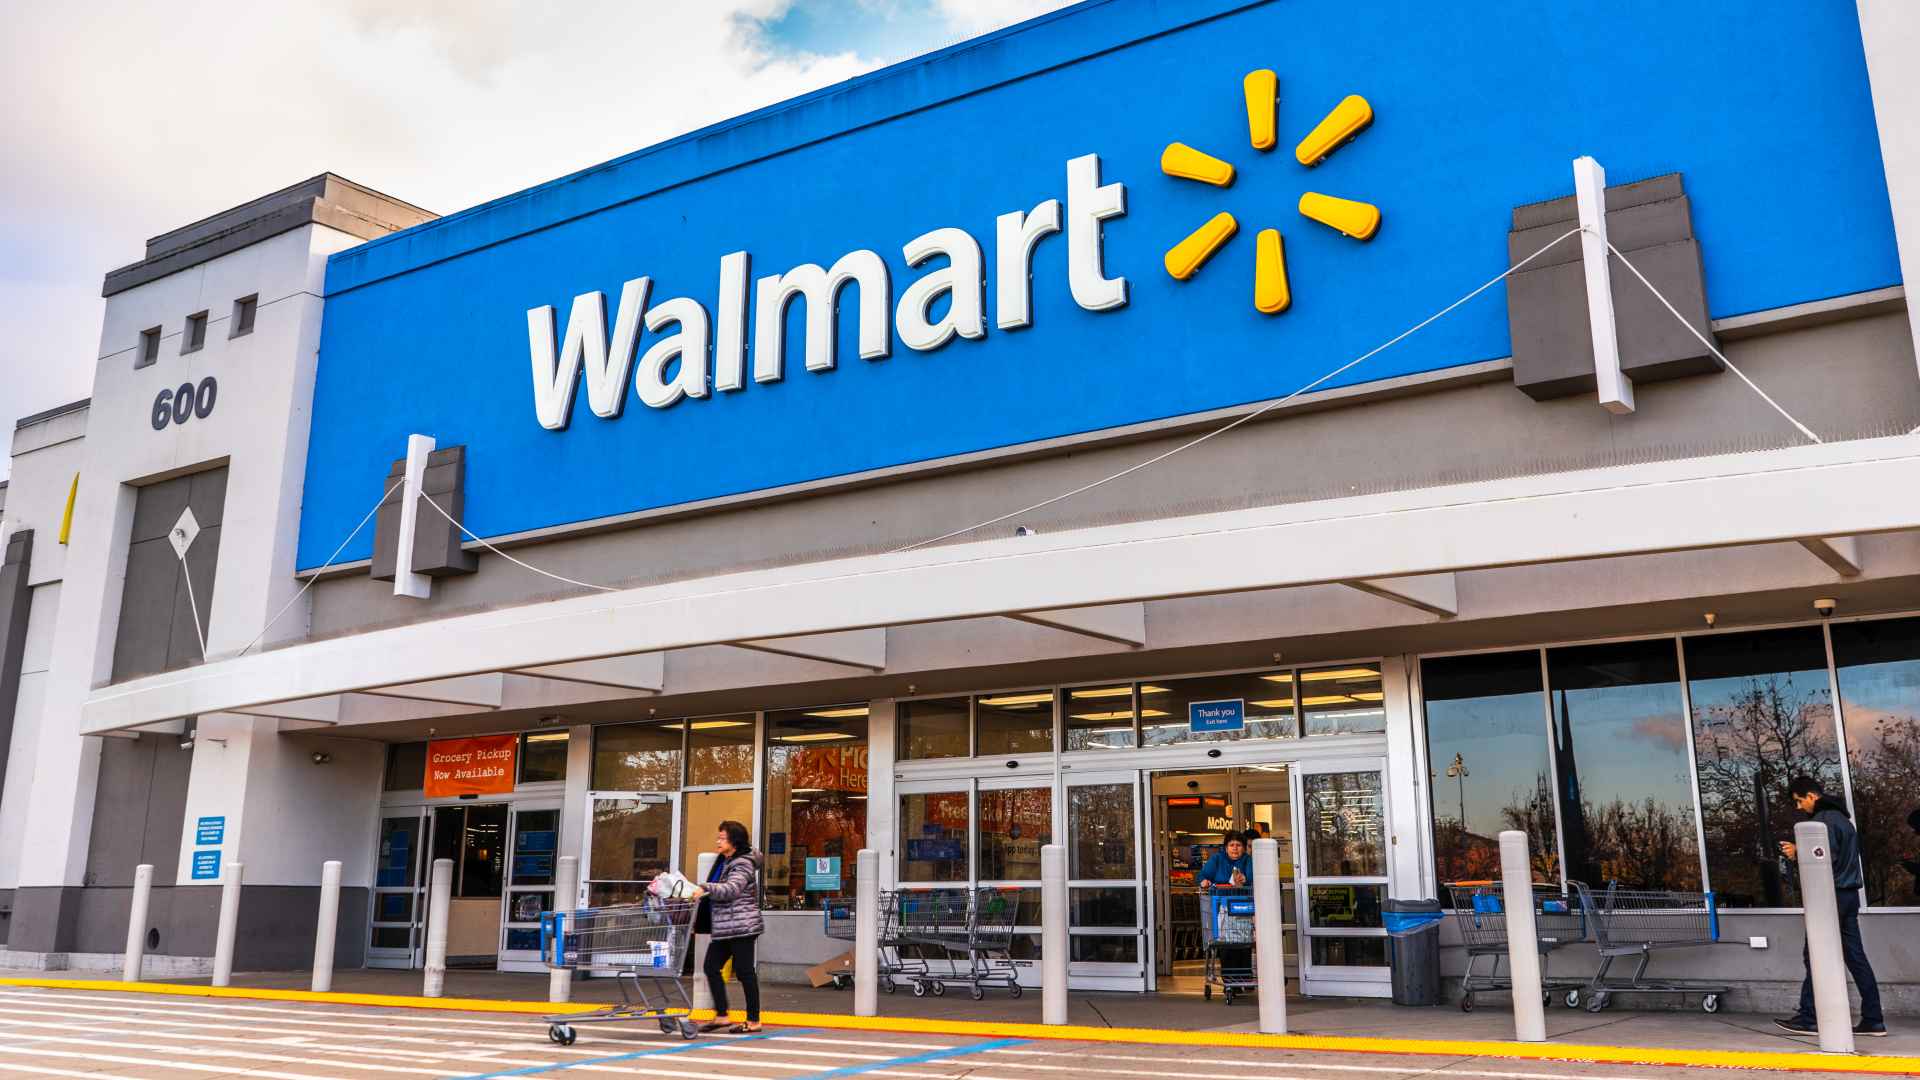 9 Walmart Food Items That Have the Best Deals in the Fall